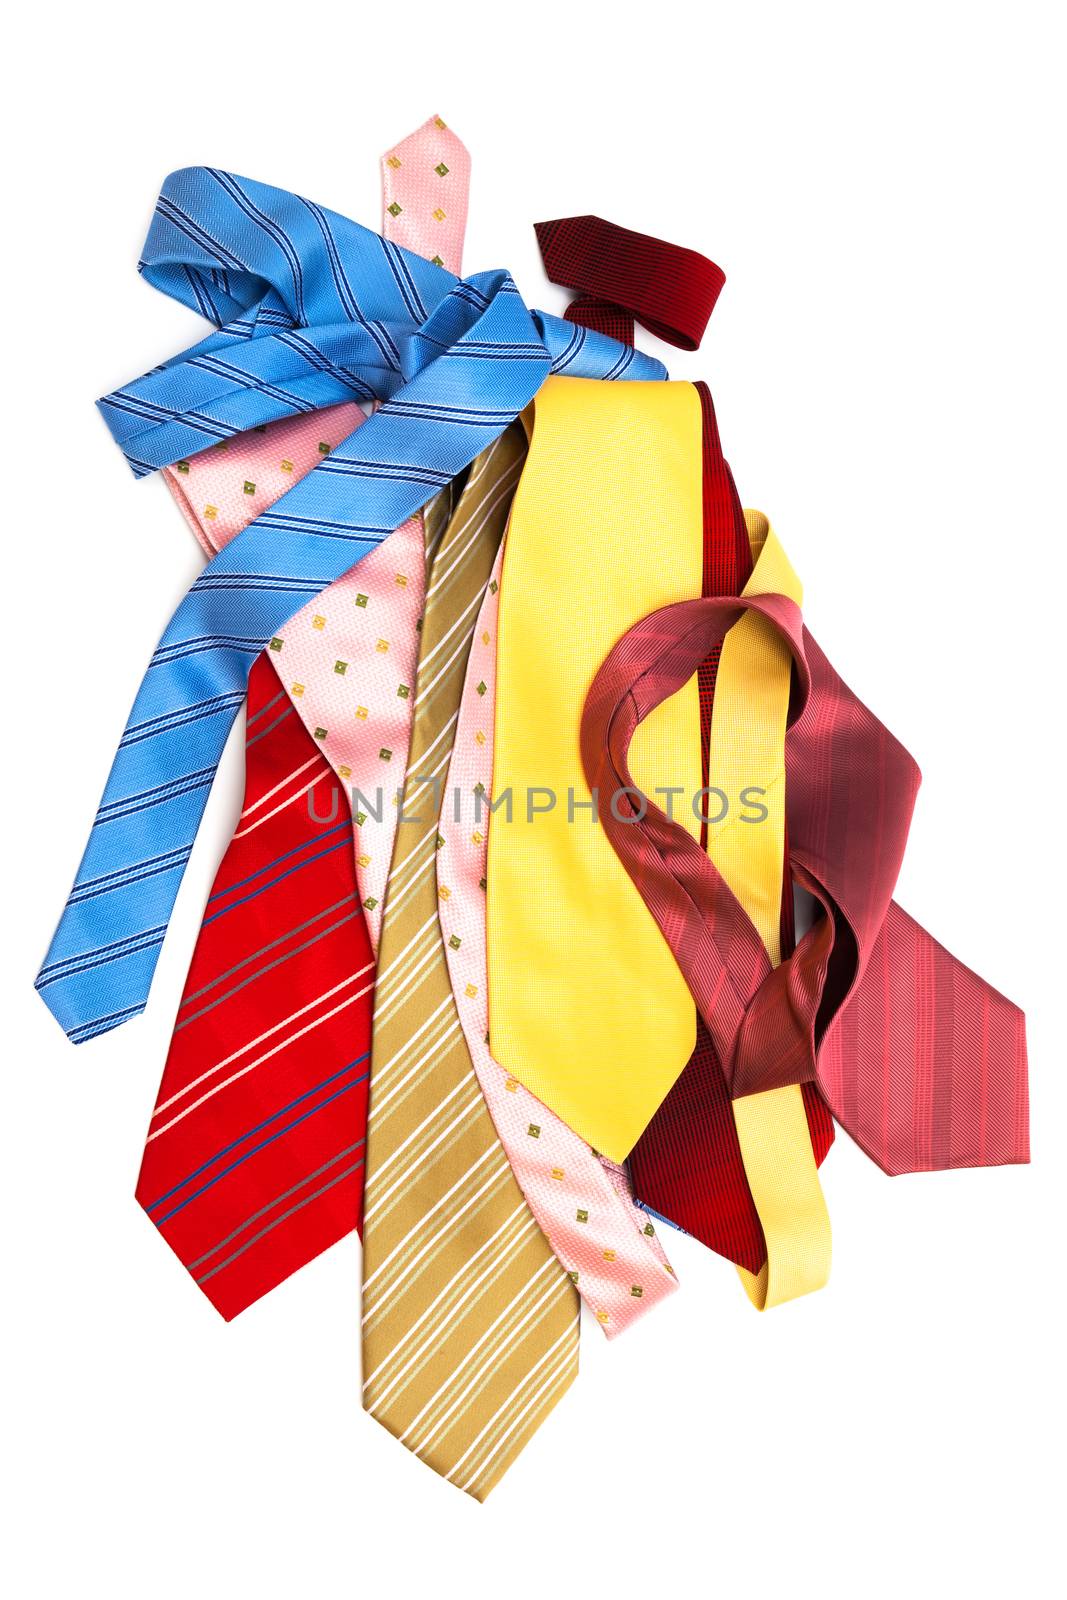 bright and fashionable ties on a white background